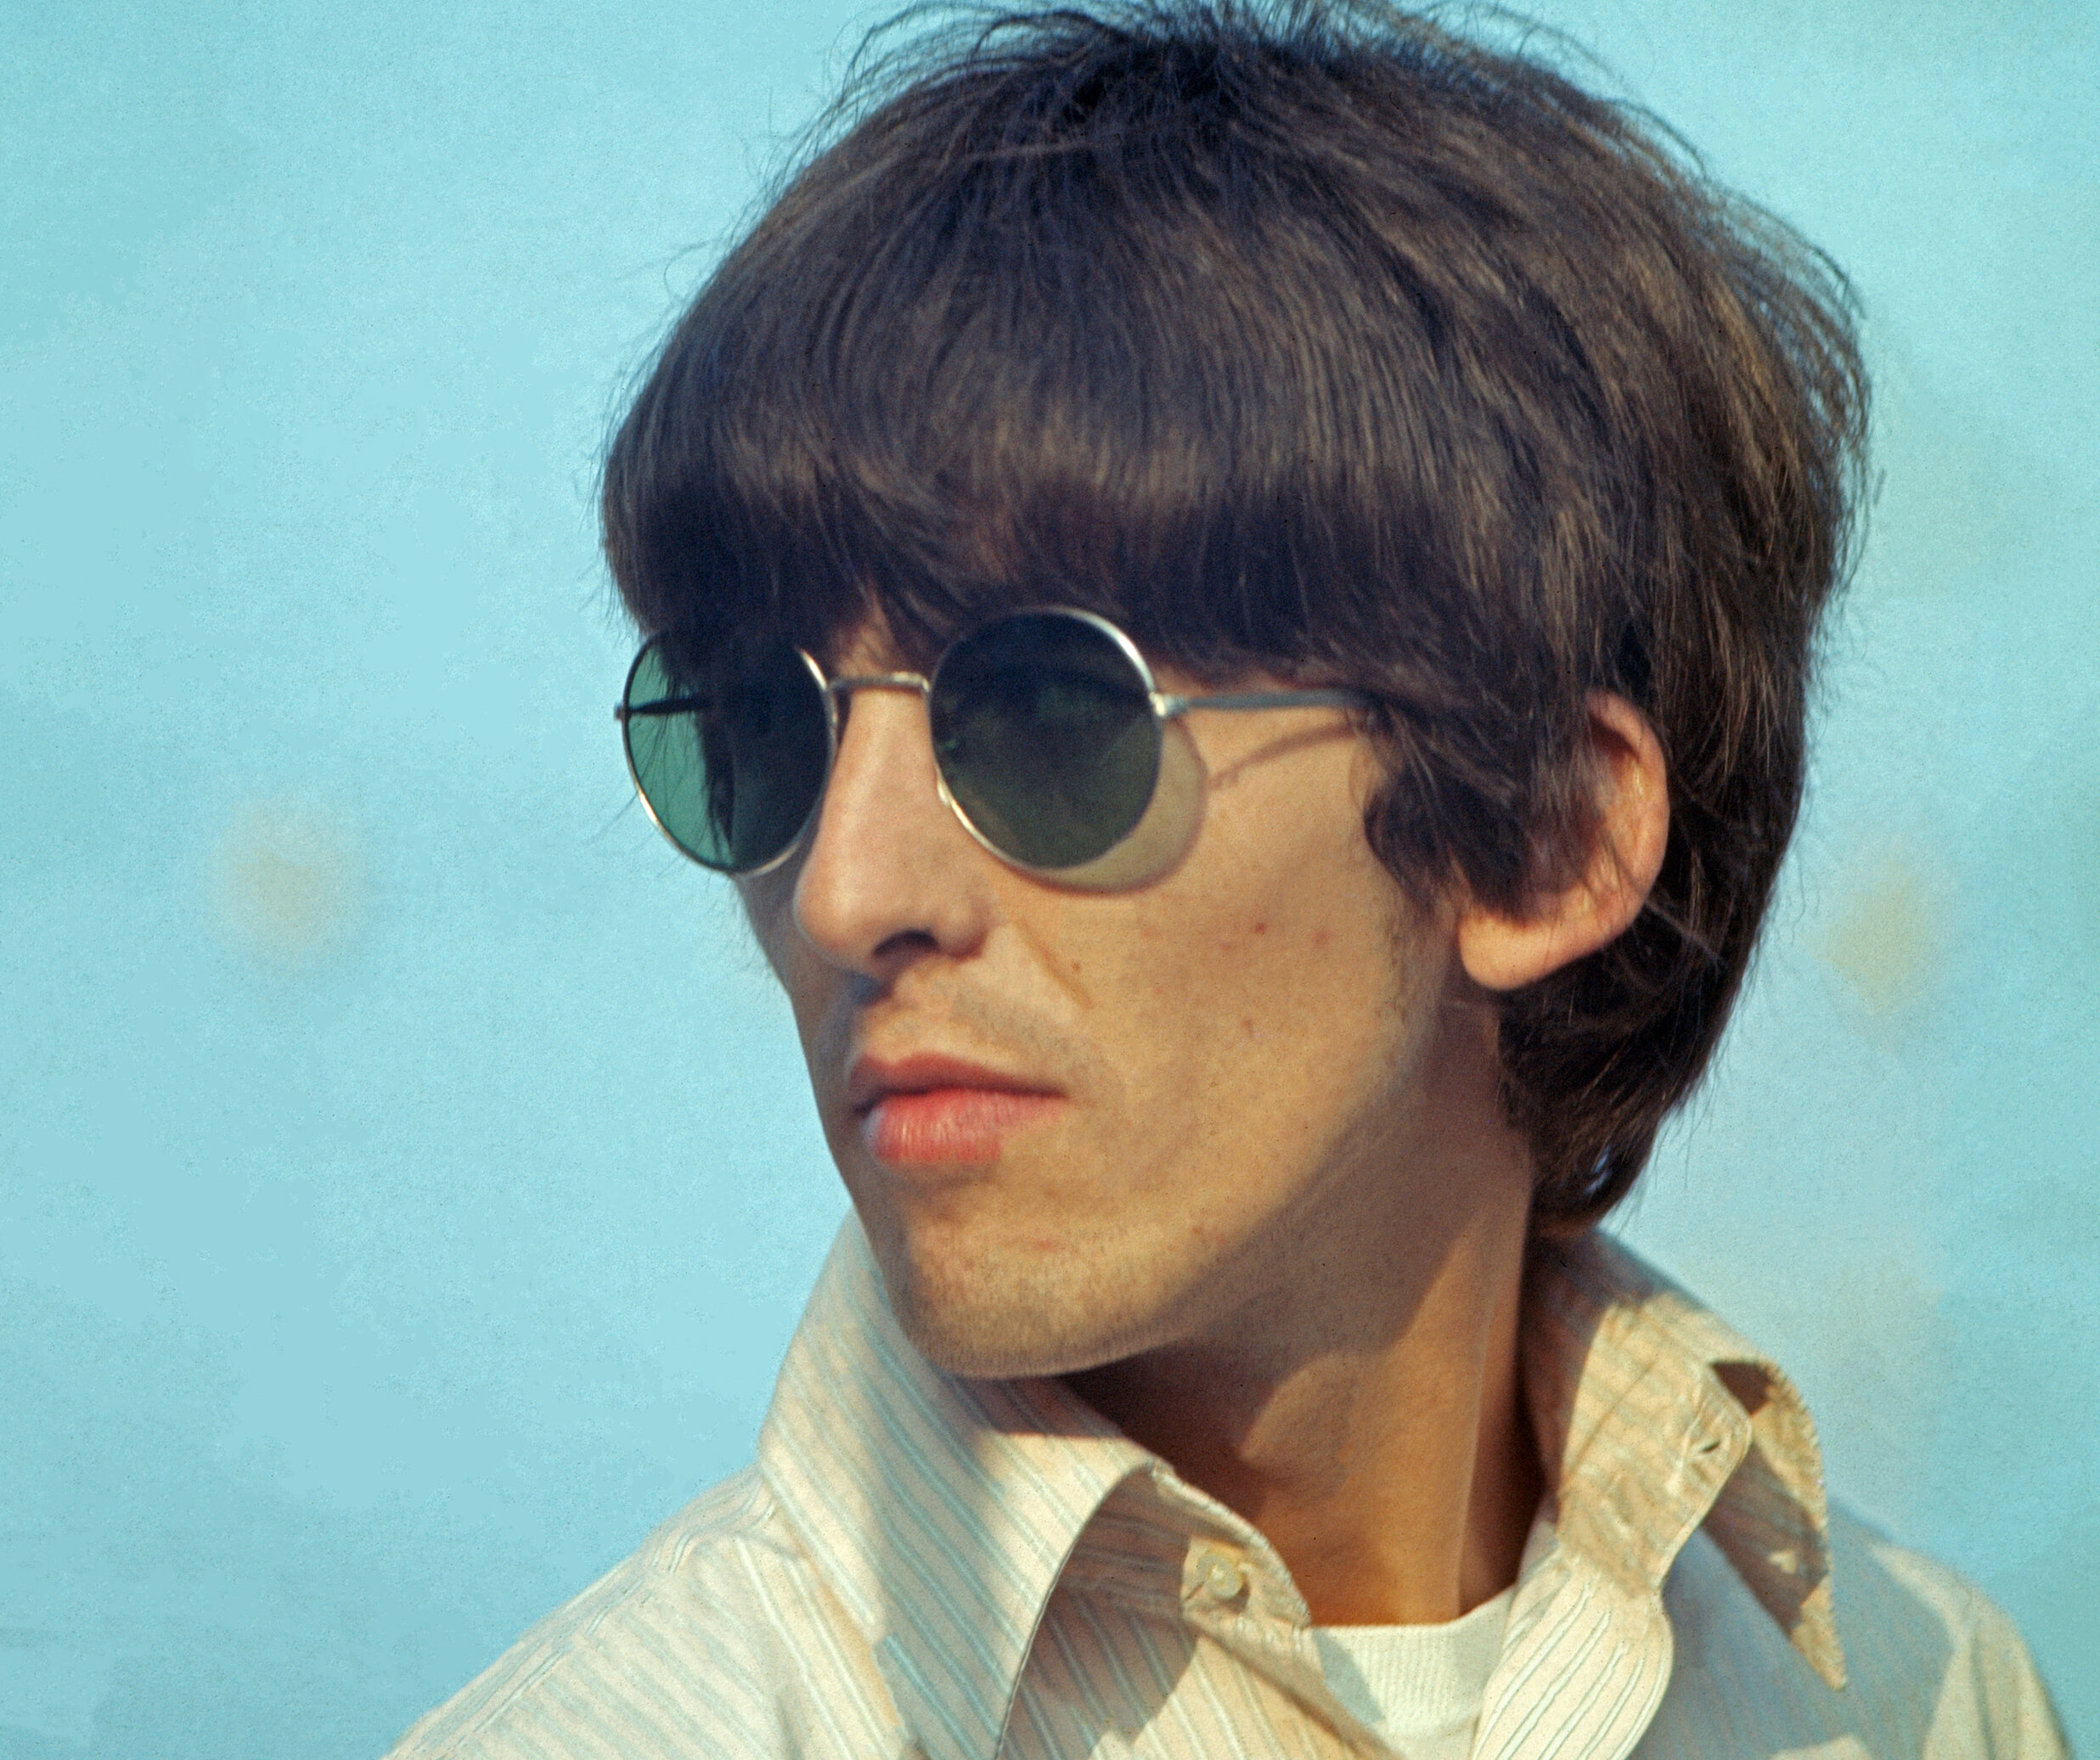 A close-up of George Harrison in 1966. He's wearing round sunglasses and a yellow collared shirt.